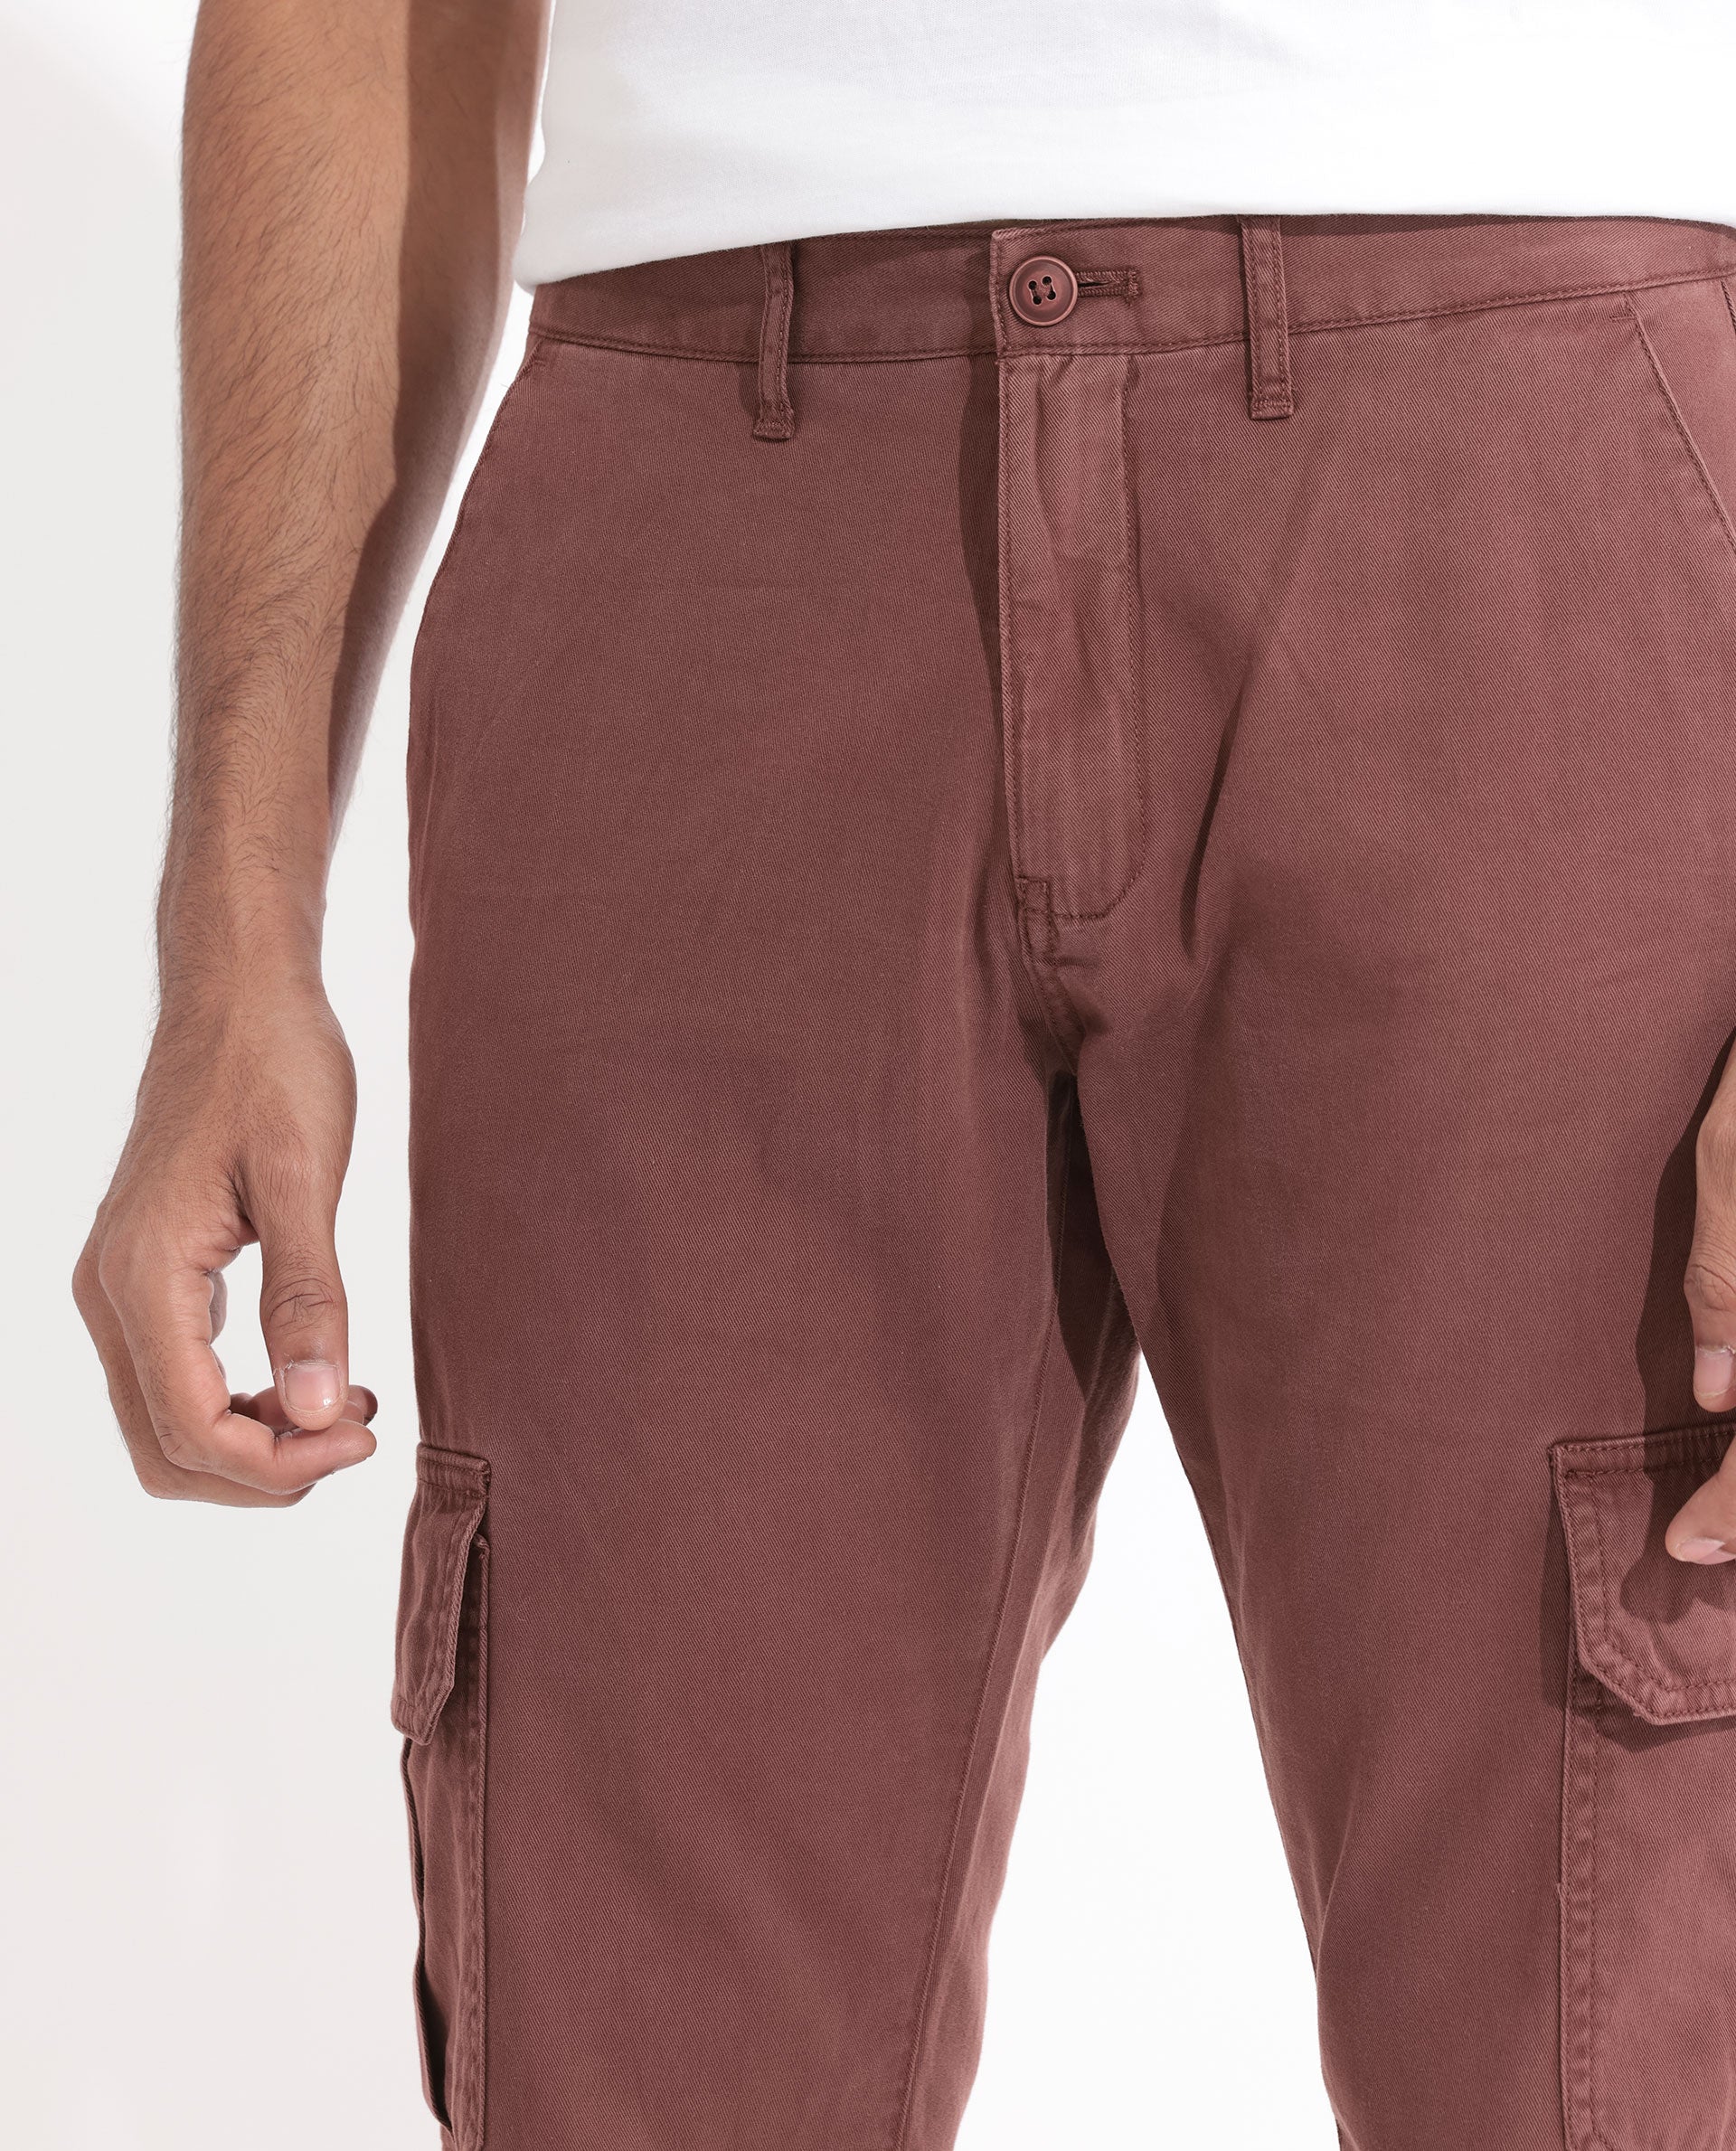 Relaxed Fit Cotton cargo trousers - Light beige - Men | H&M IN